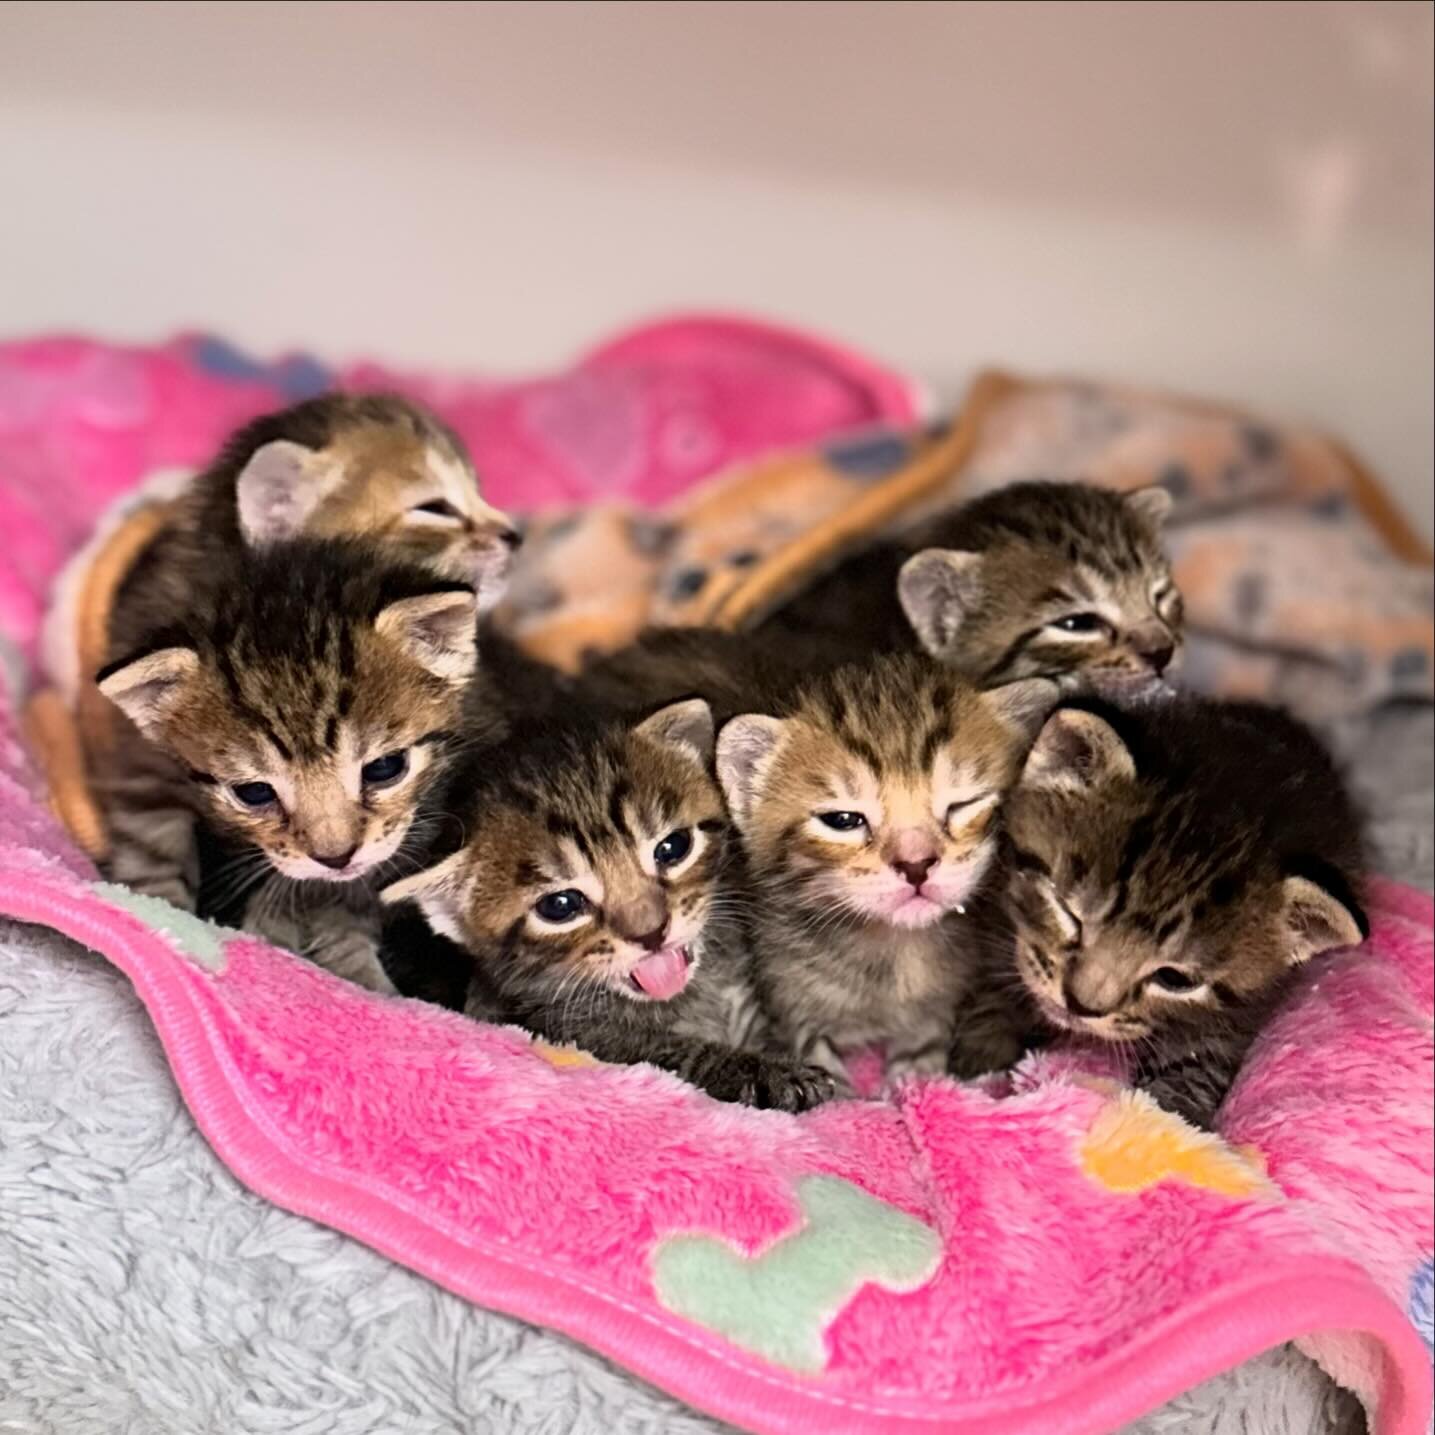 Emergency Intake: Mama was hit by a car near Pali Momi, leaving 6 kittens without a mom. A kind lady who was caring for them had contacted KAT Charities because she was unable to feed them since they were not latching onto the miracle nipples. They w